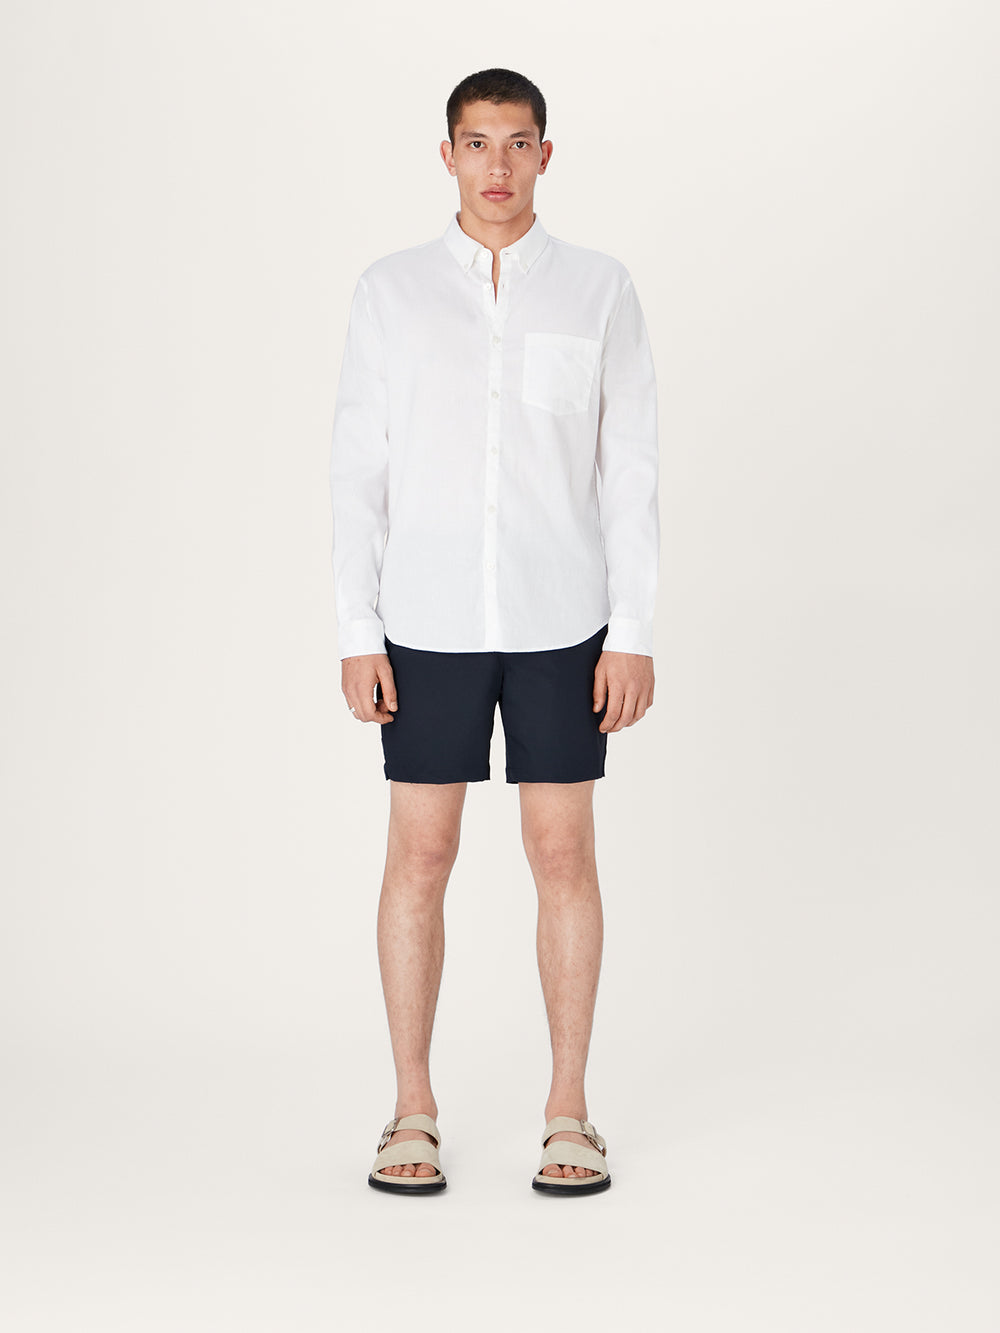 The All Day Shirt Linen Collared || White | Linen